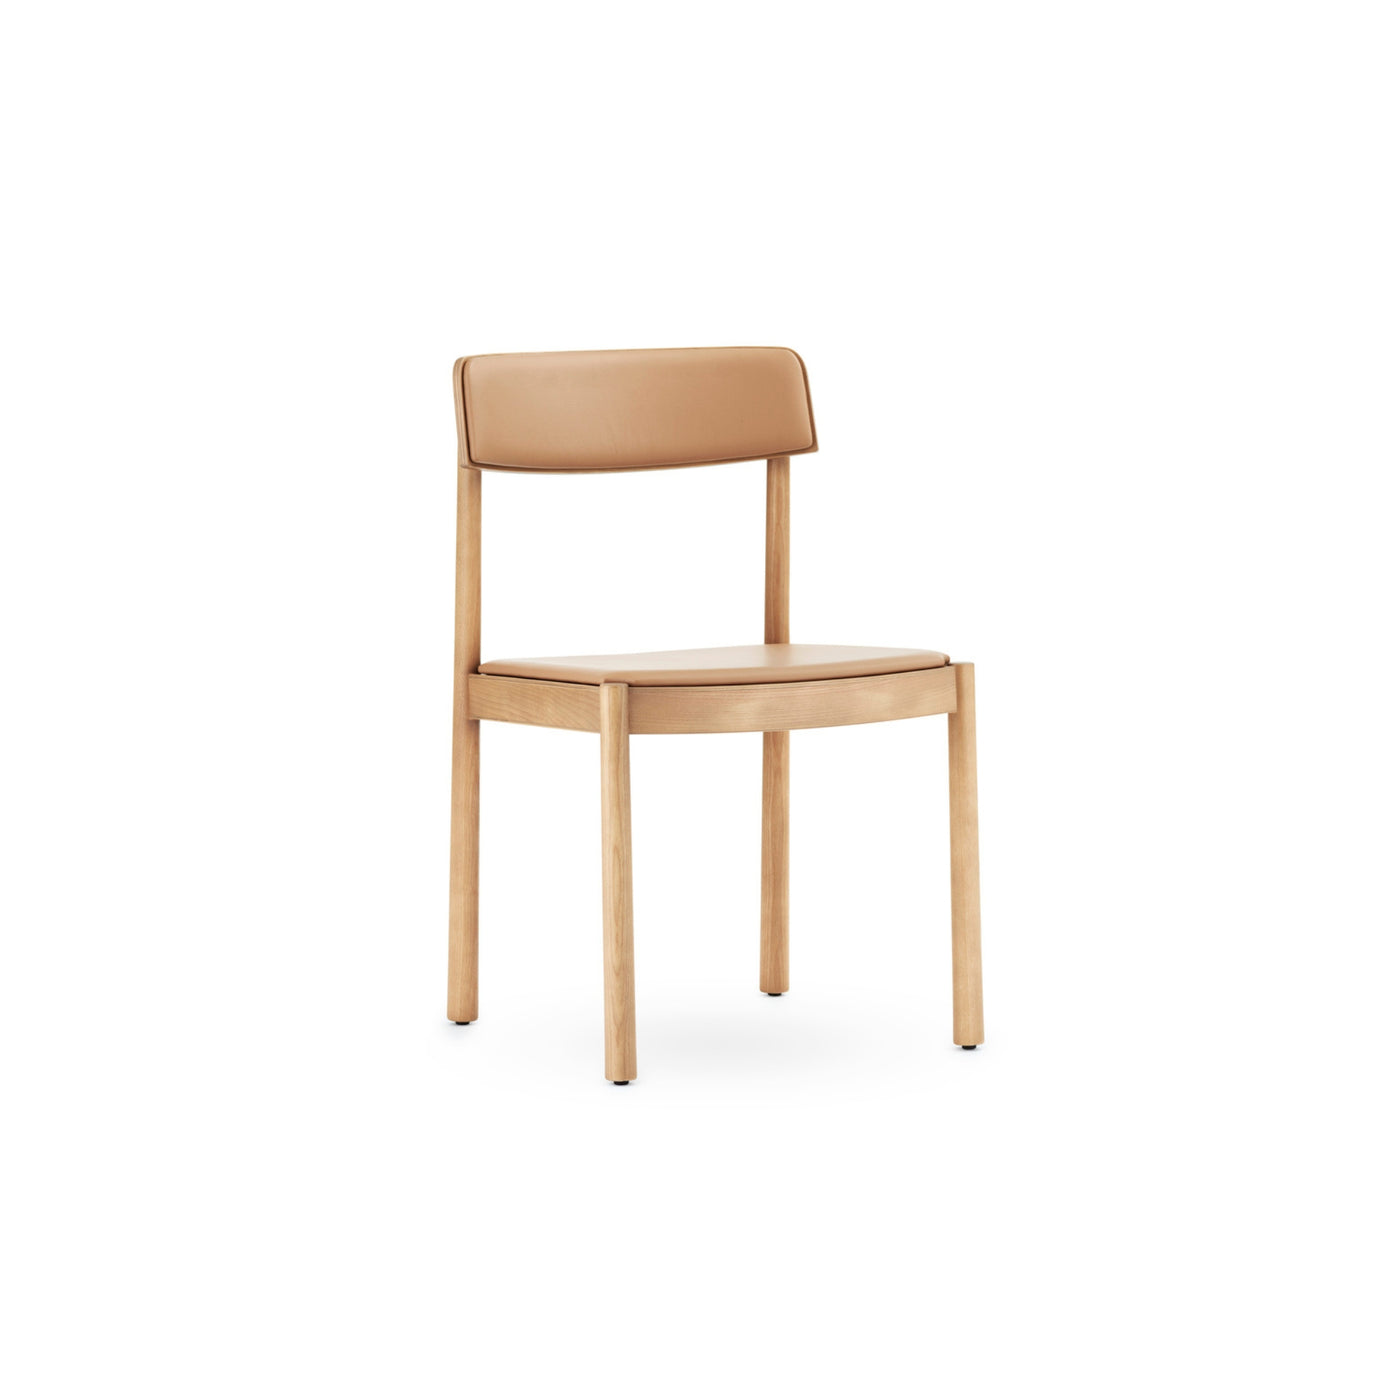 Normann Copenhagen Timb Chair at someday designs. #colour_tan-camel-leather